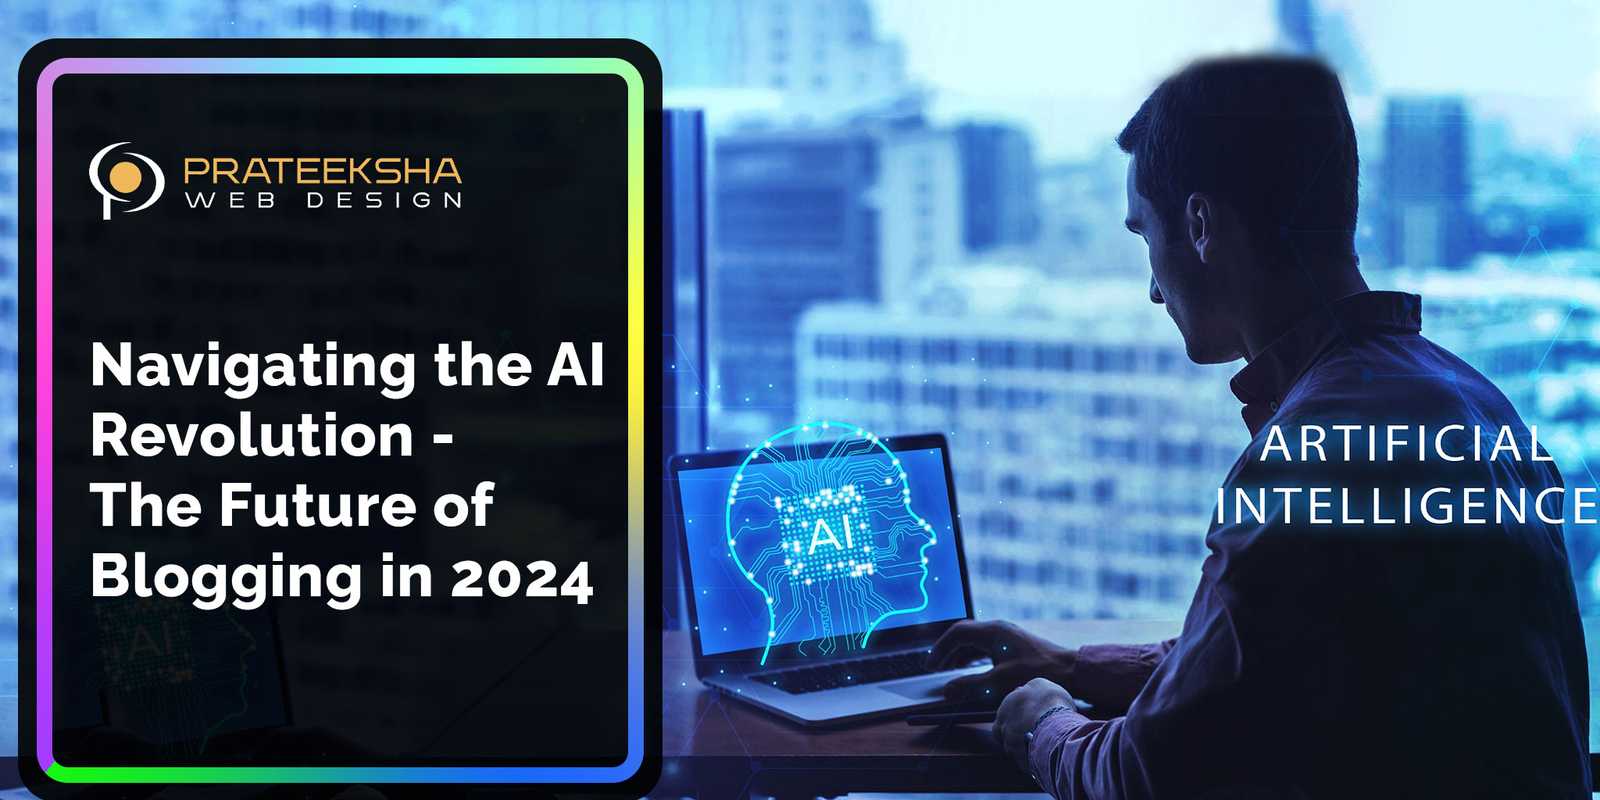 Navigating the AI Revolution - The Future of Blogging in 2024